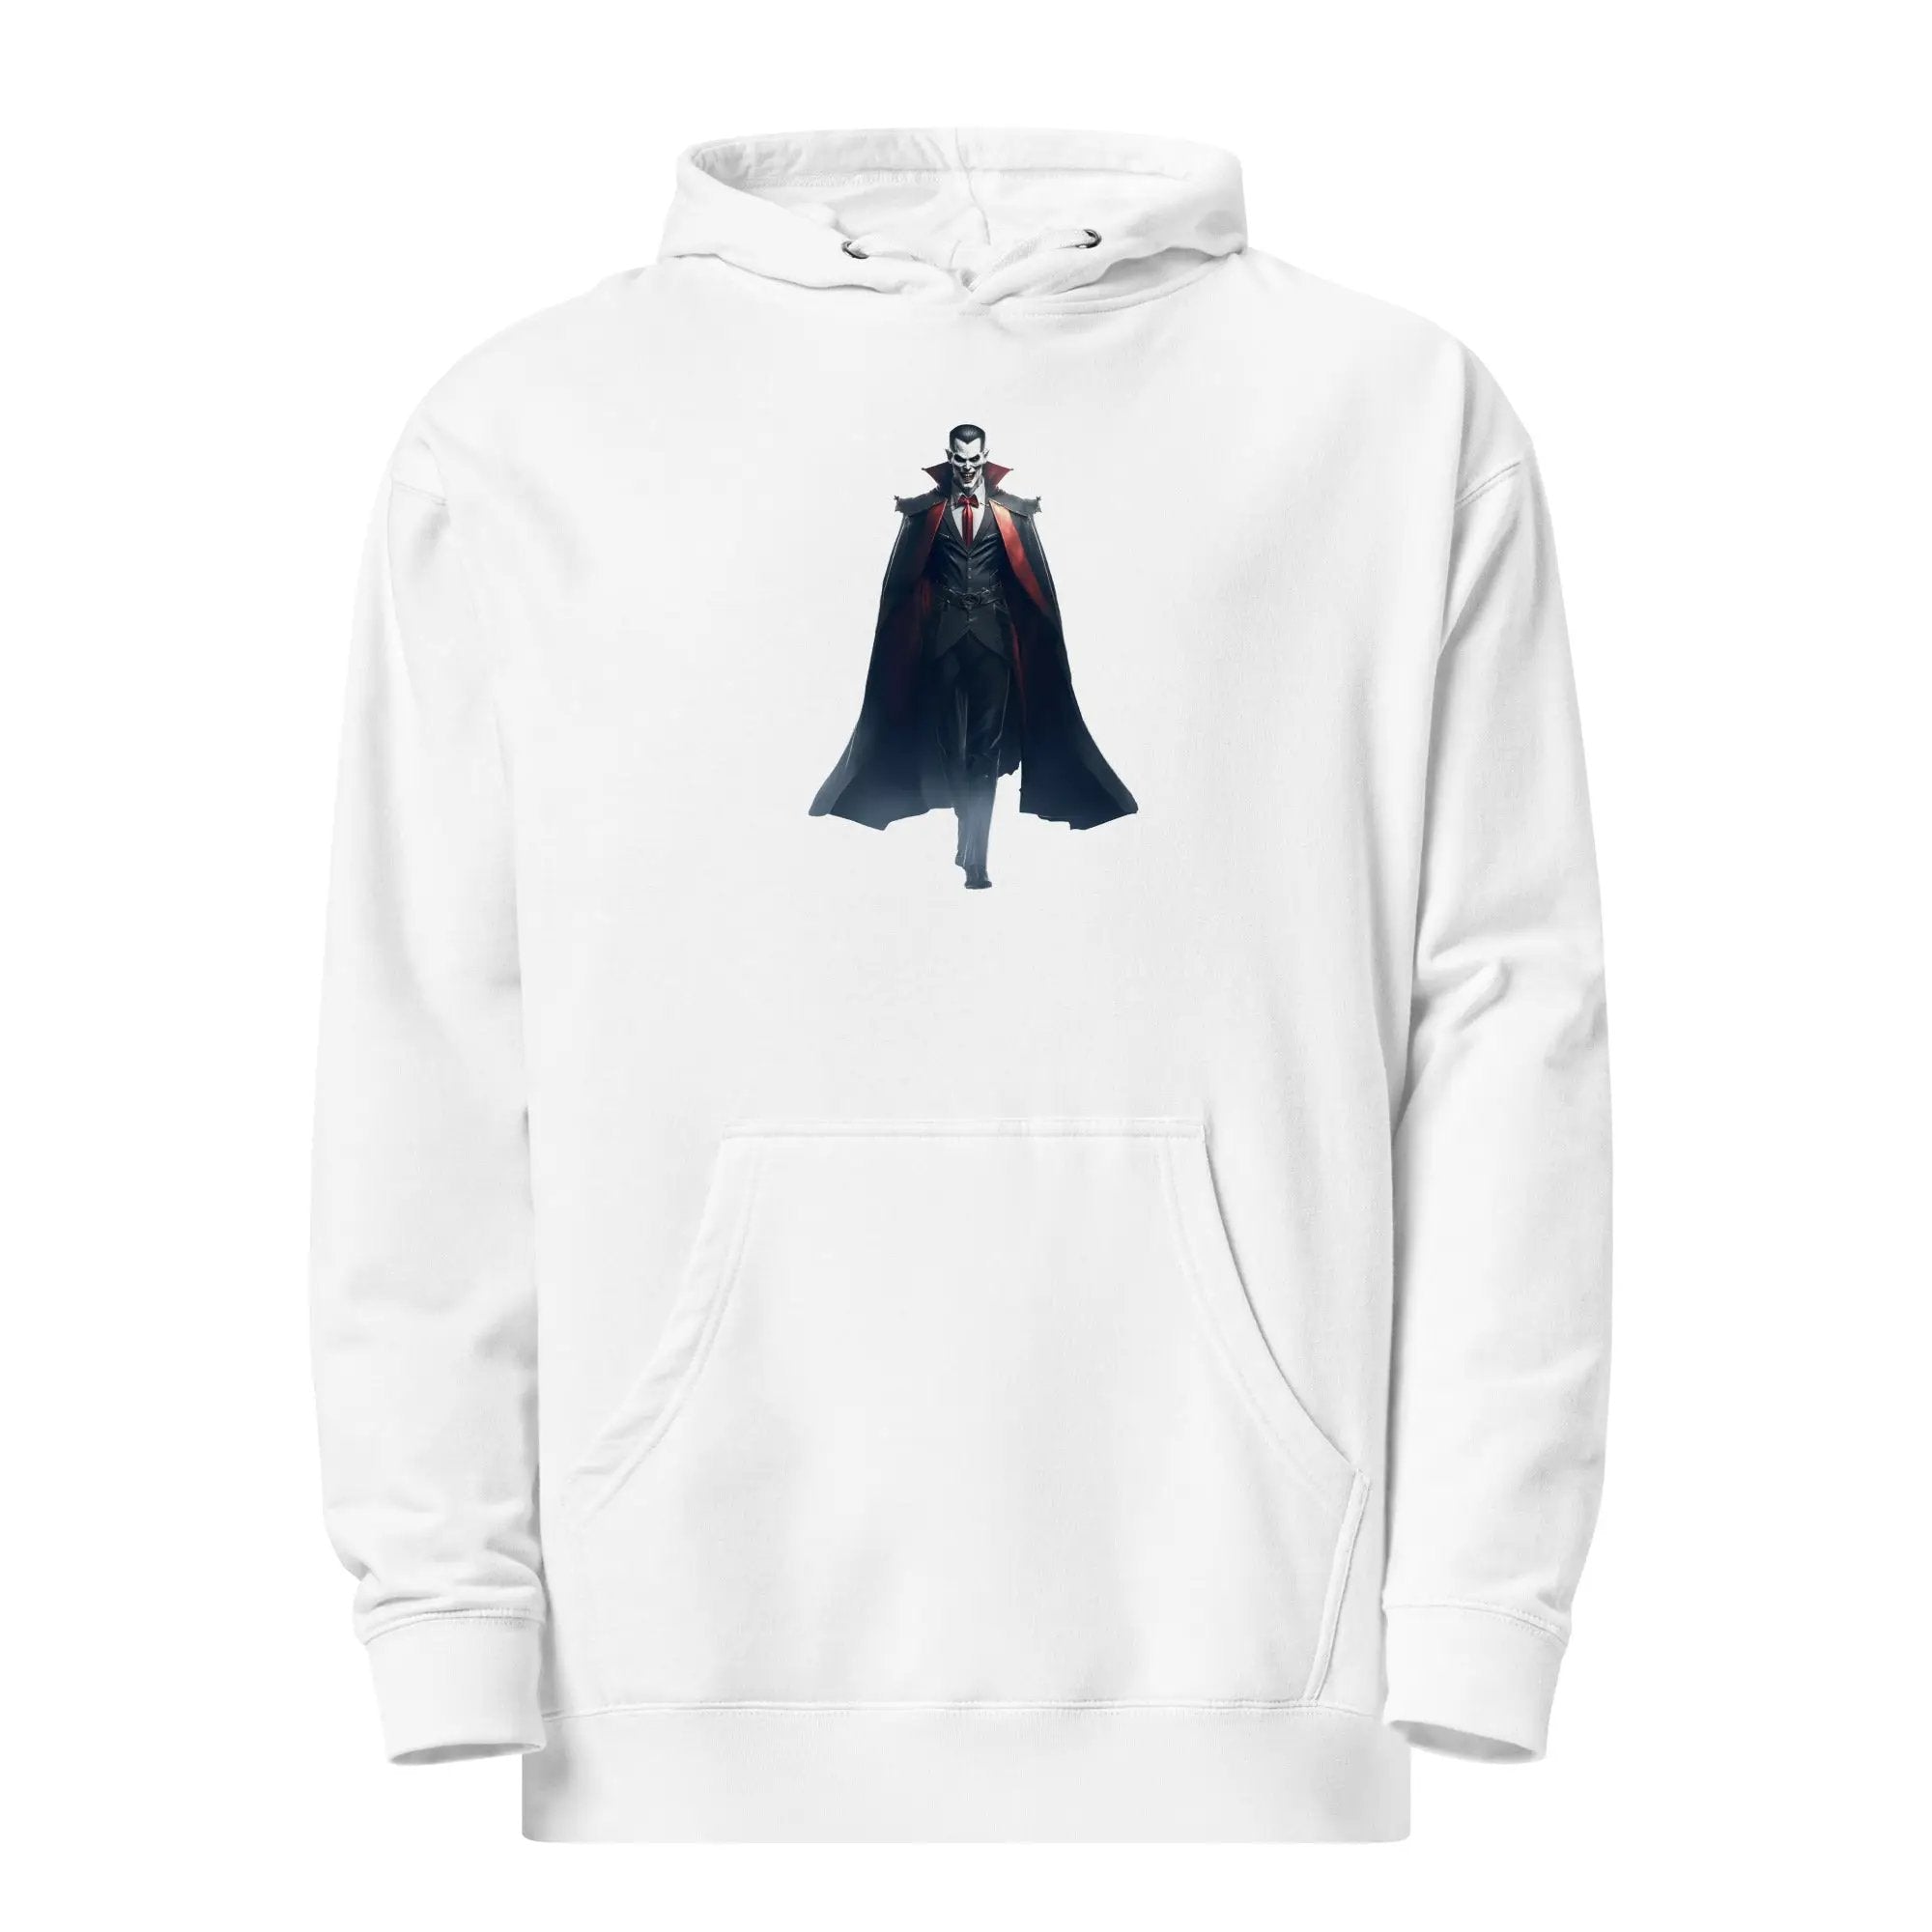 The Monster Squad "Dracula" Unisex midweight hoodie